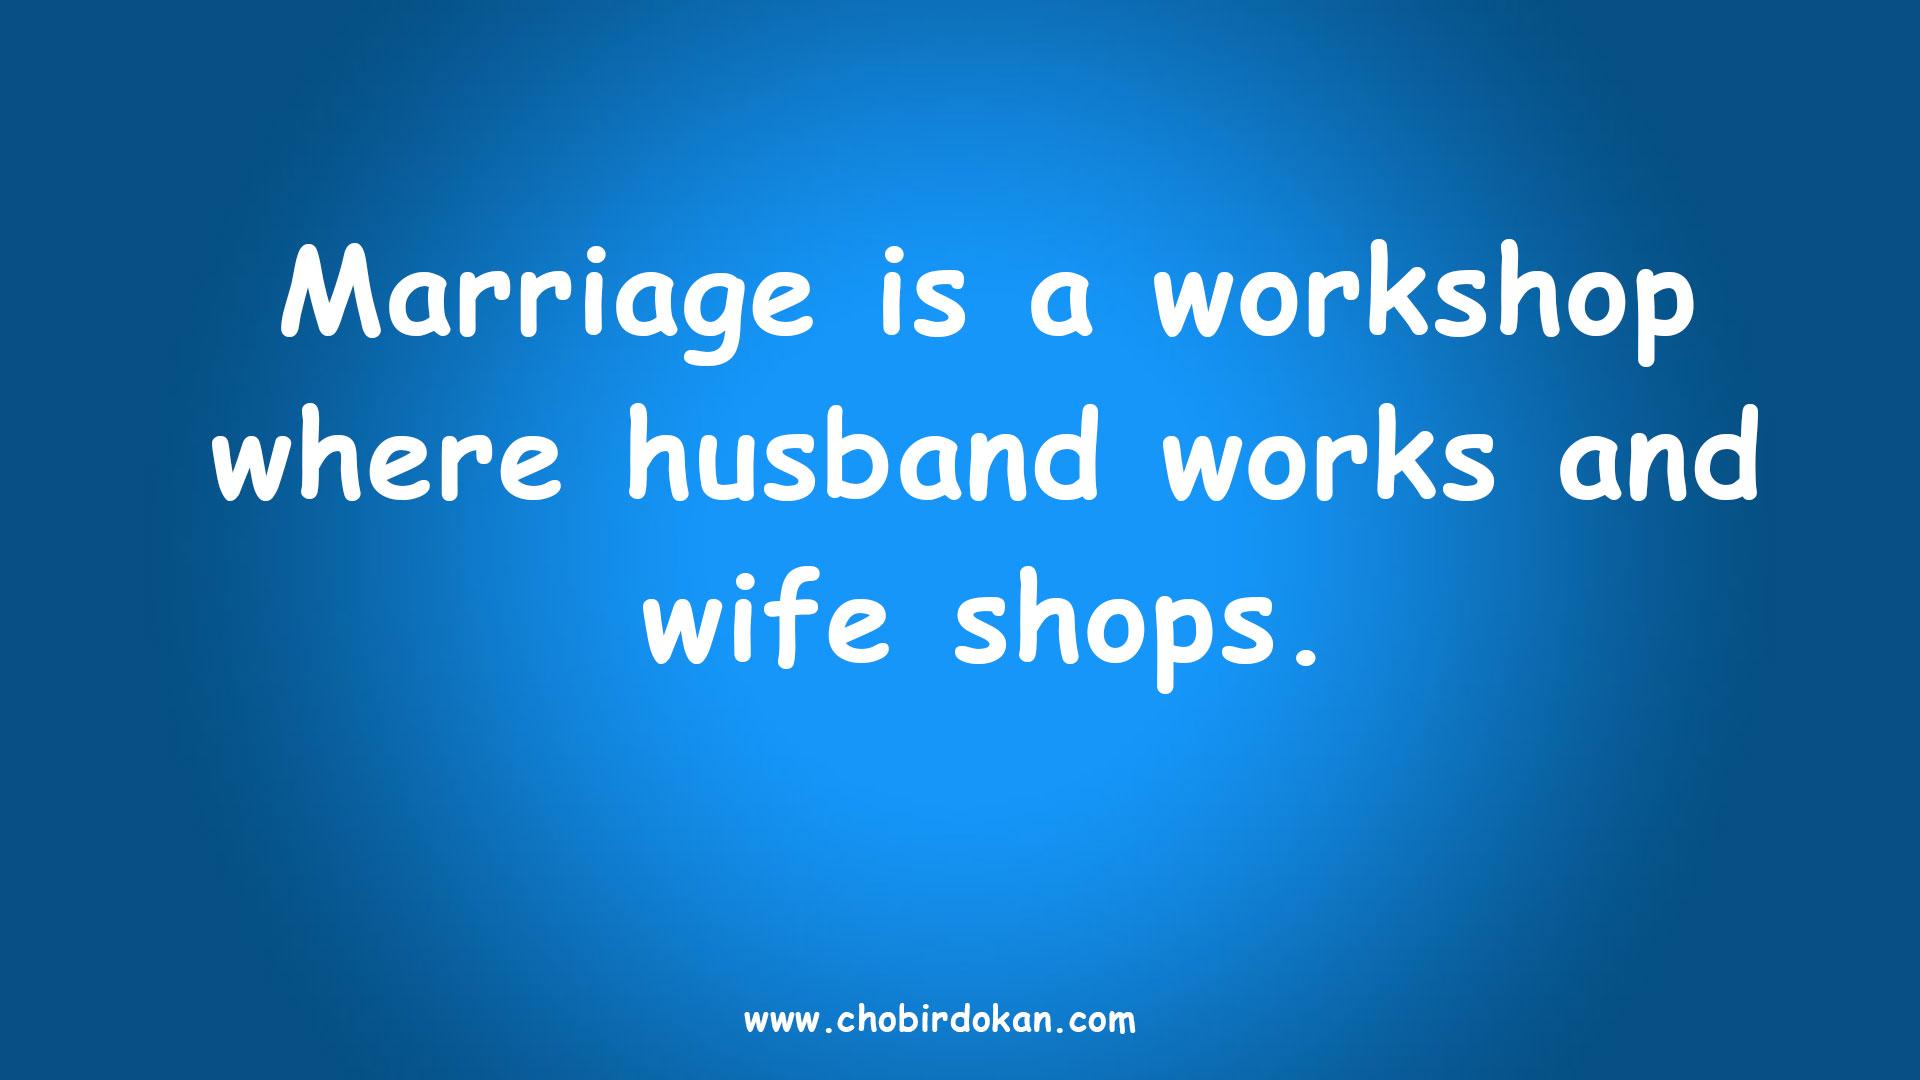 Funny Marriage Quotes Image Funny Wedding Sayings, quotes saying